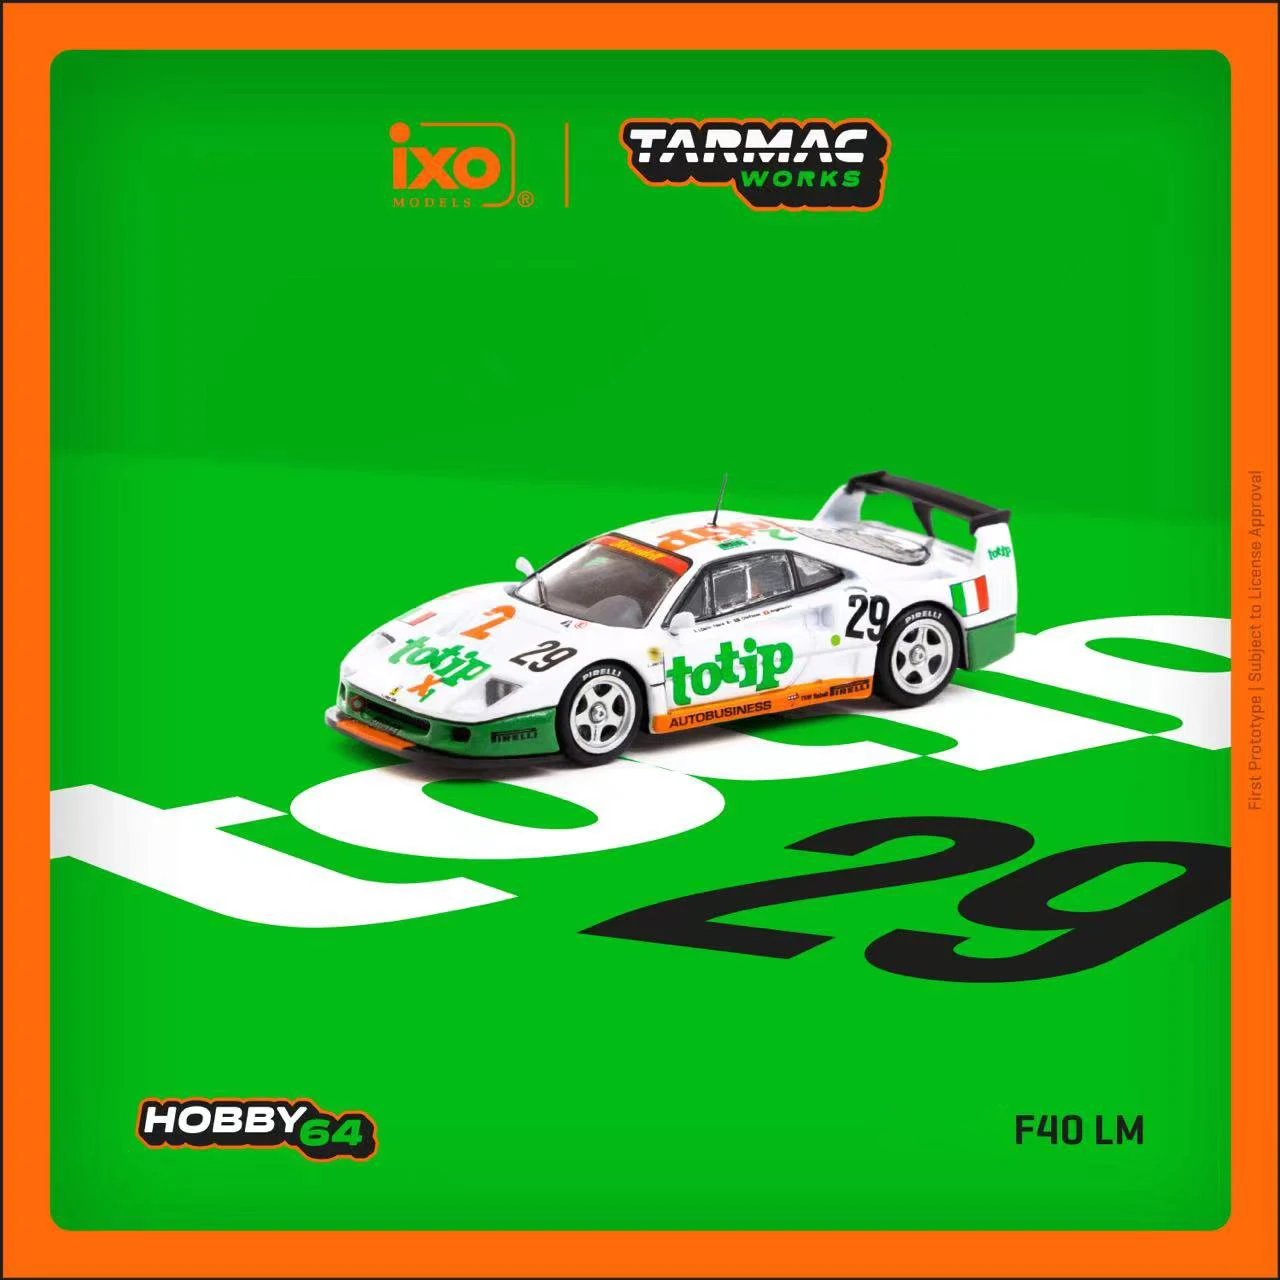 

TW In Stock 1:64 F40 LM 24h Of Le Mans 1994 Diecast Diorama Car Model Collection Miniature Carros Tarmac Works